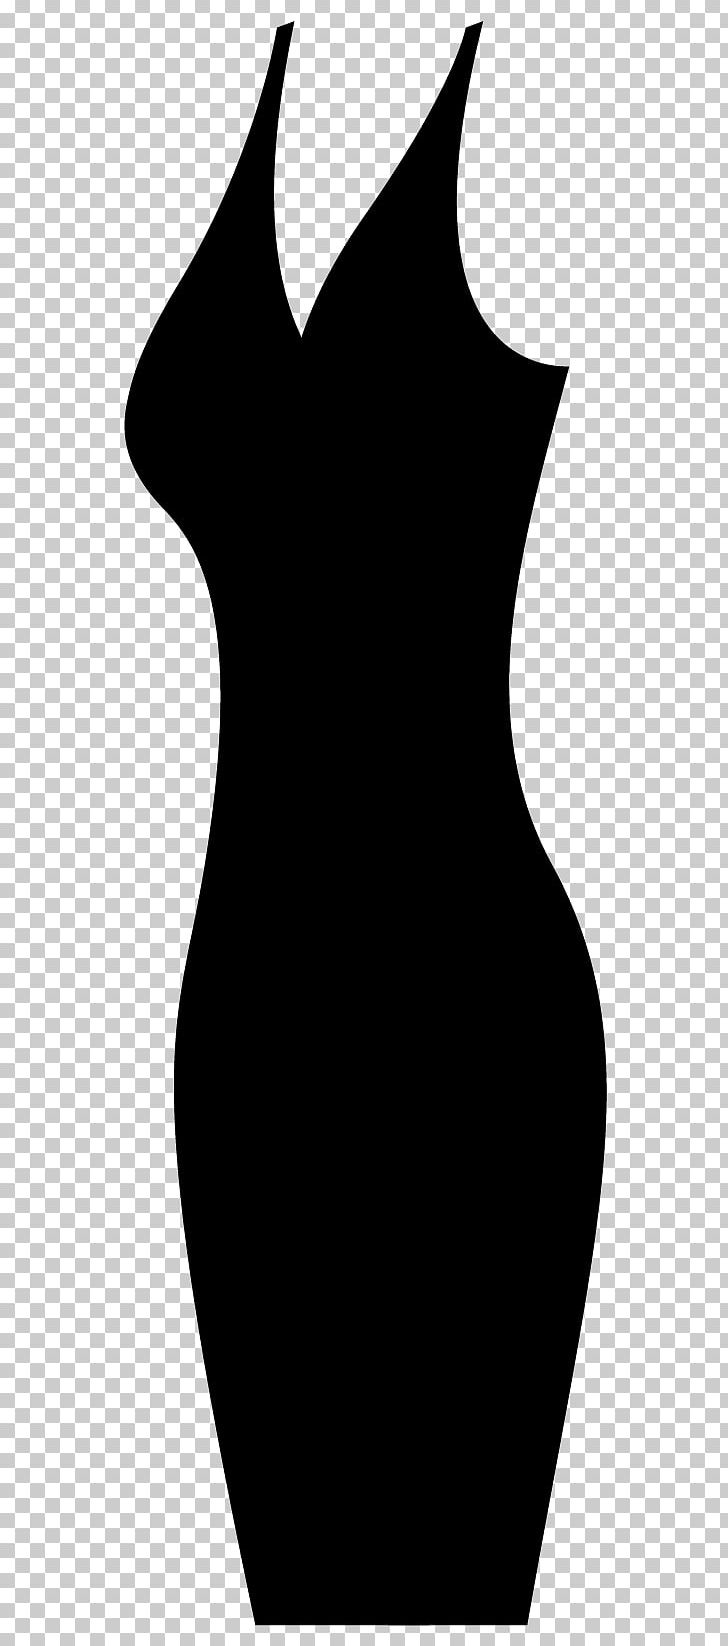 Black And White Monochrome Photography Shoulder PNG, Clipart, Black, Black And White, Clothing, Dress, Joint Free PNG Download